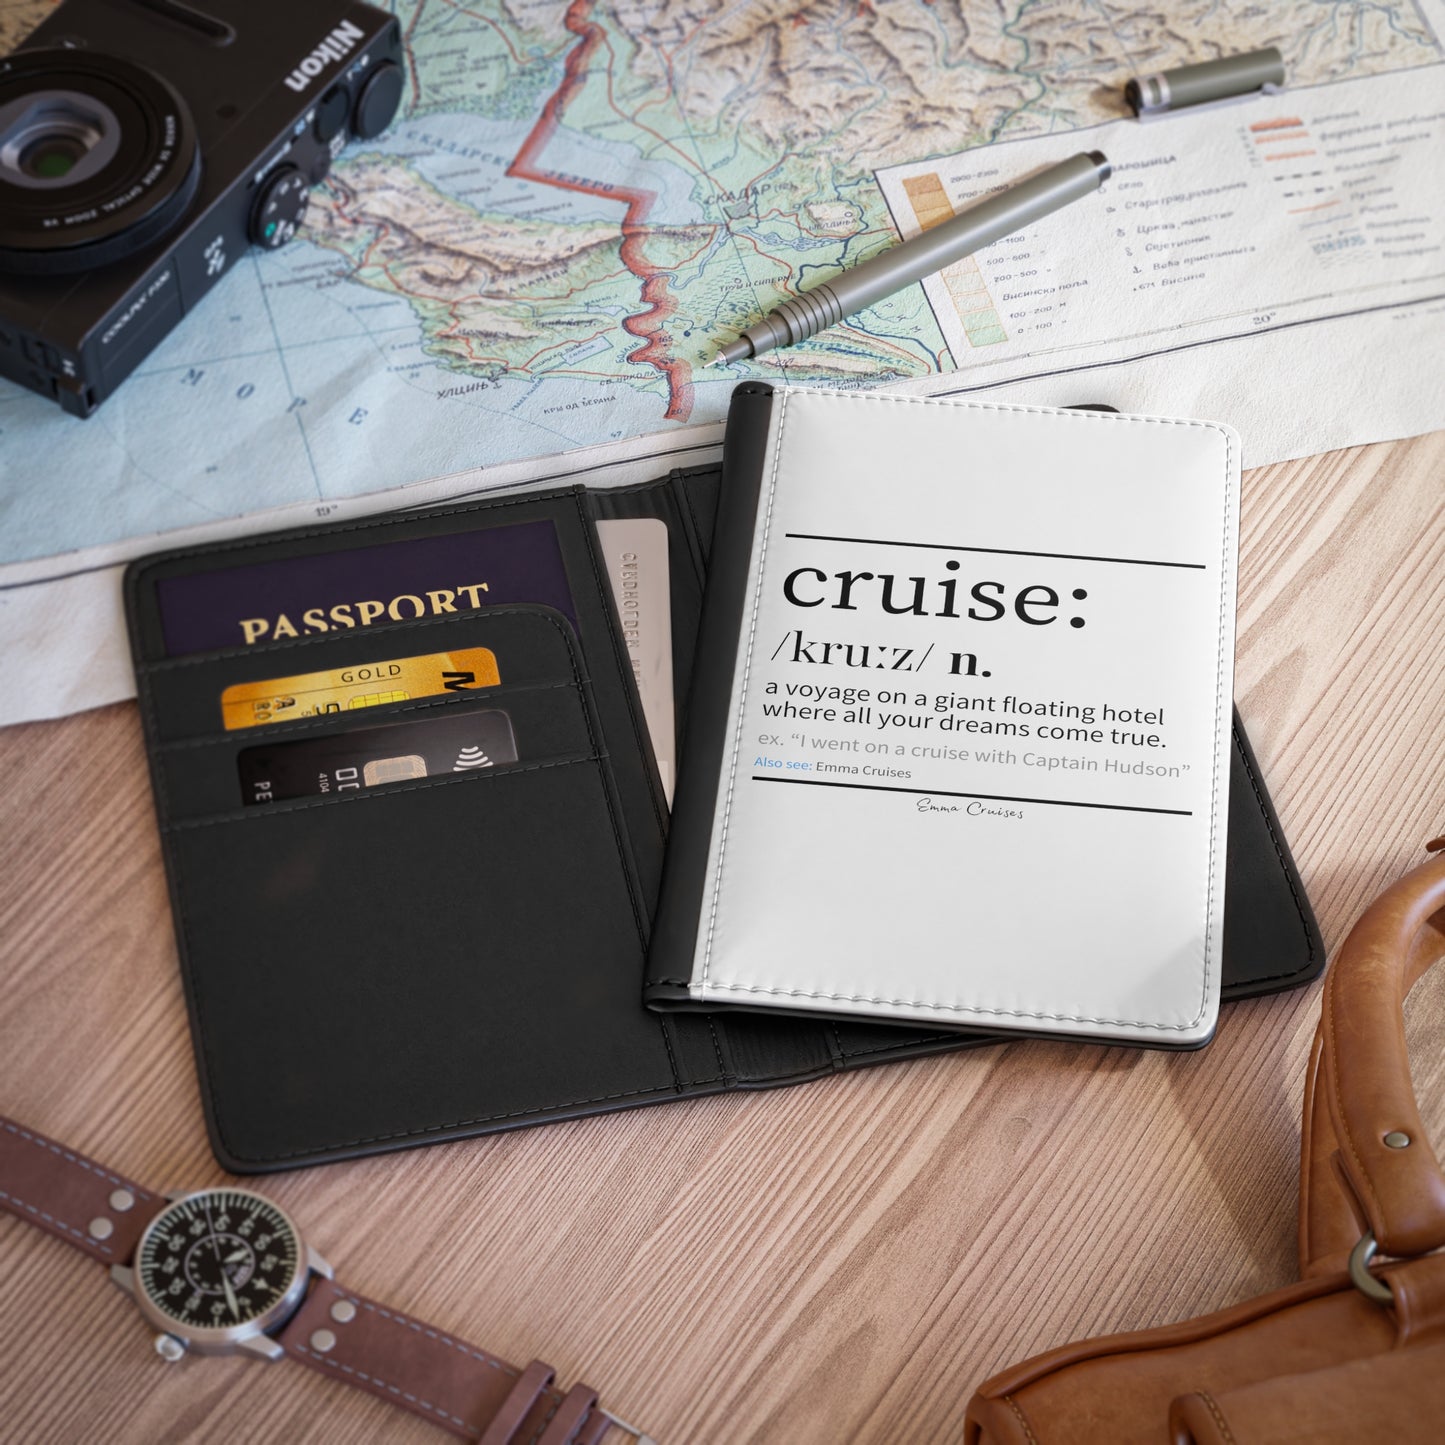 Cruise Definition - Passport Cover